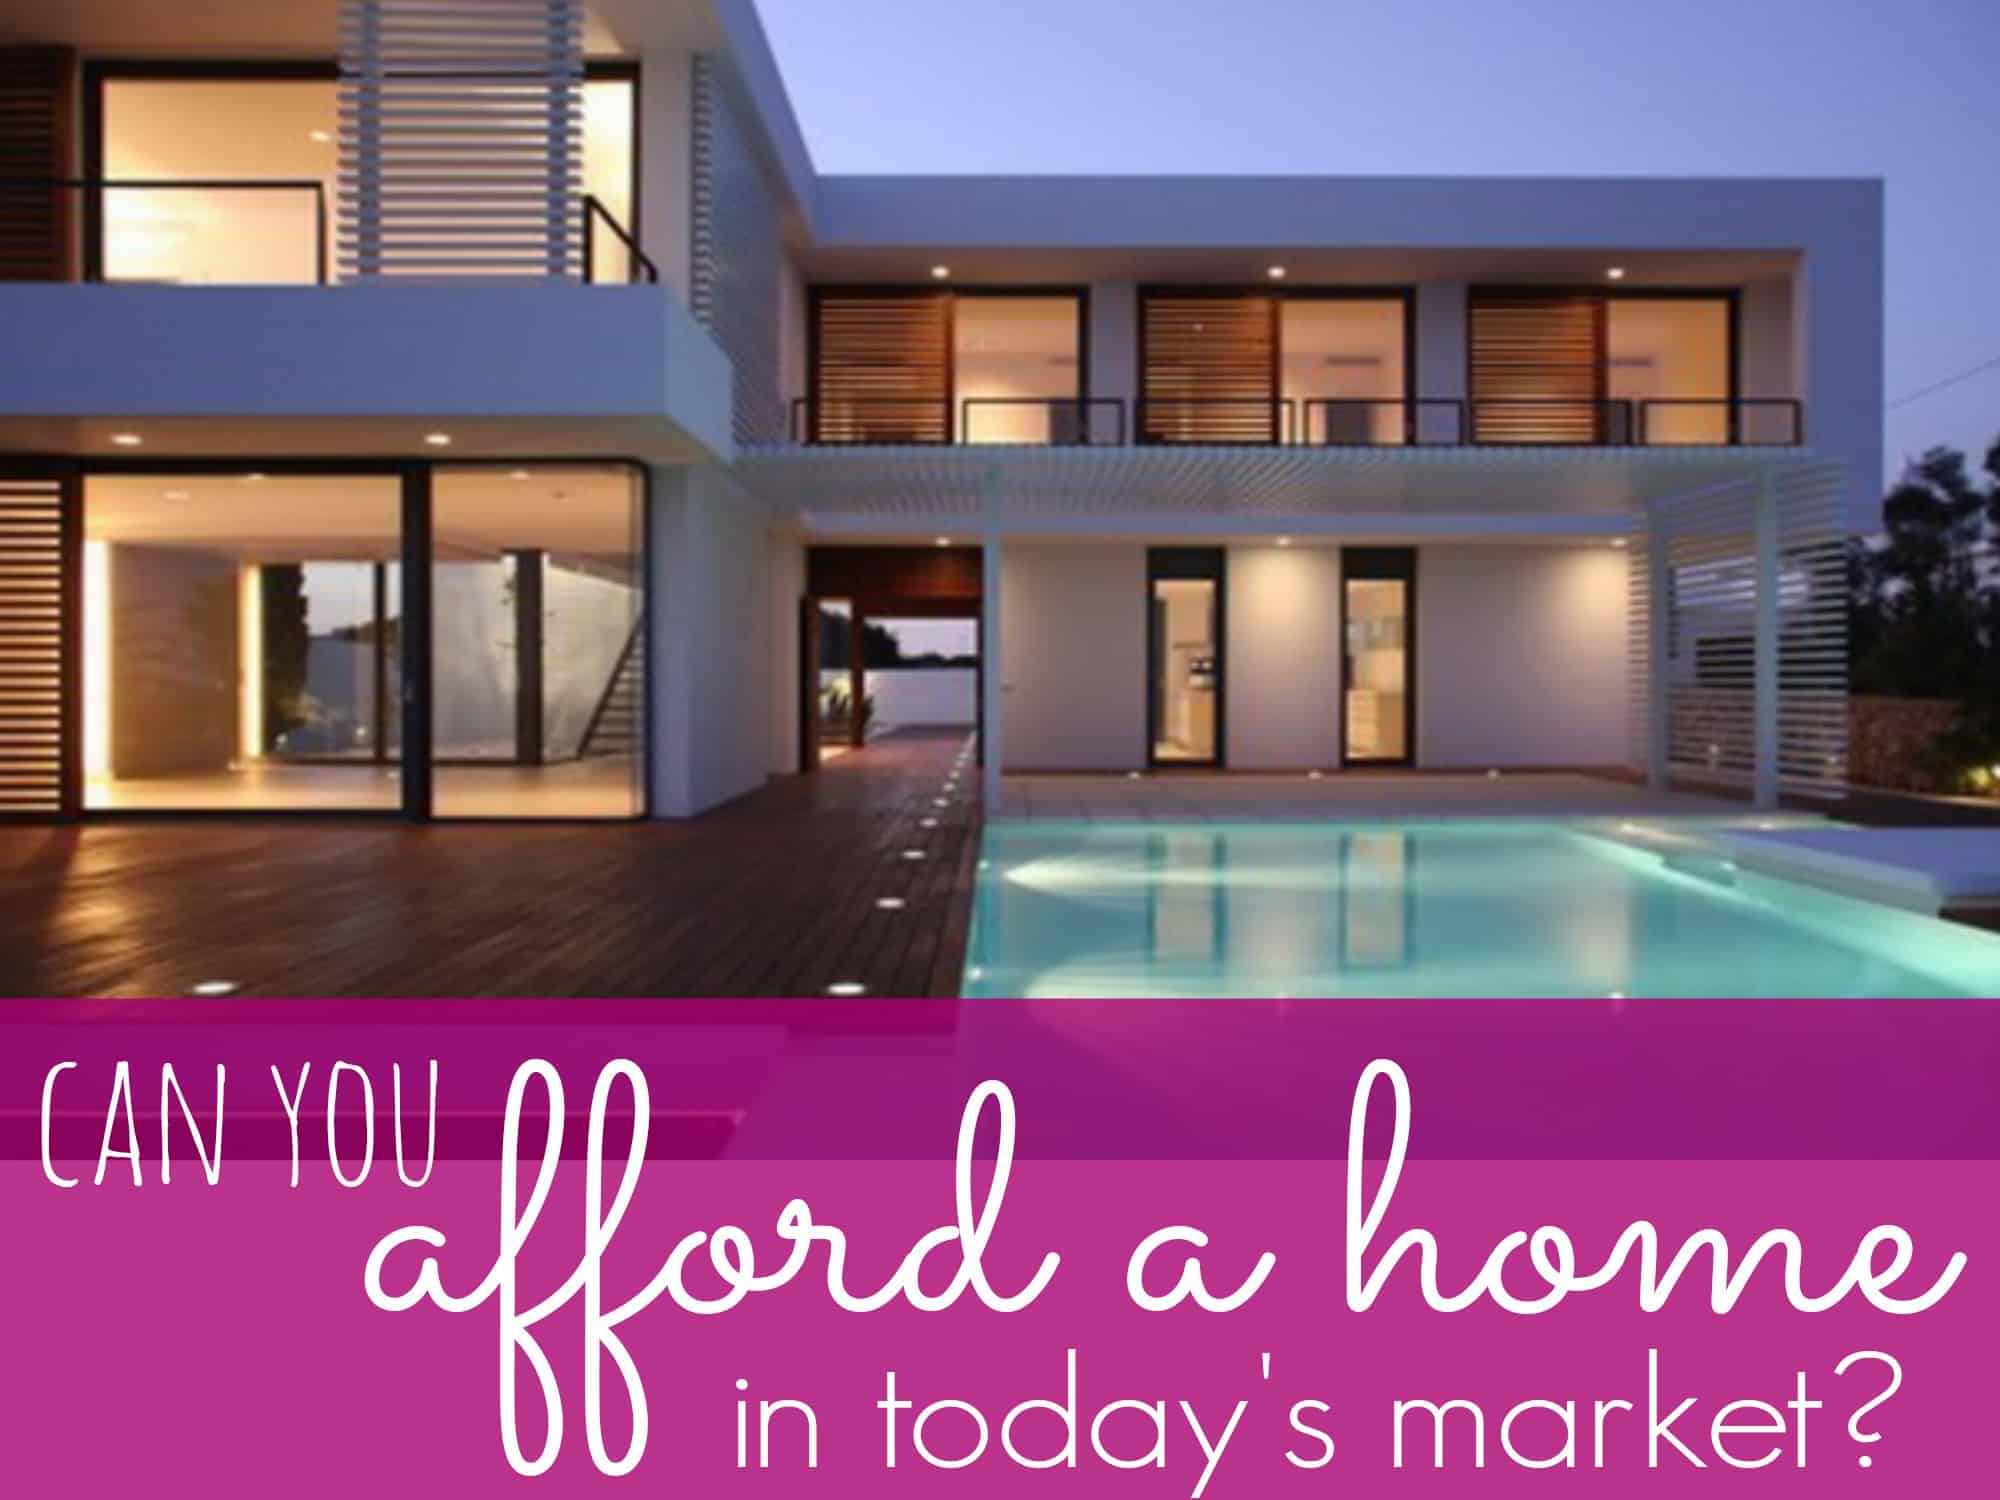 Can You Afford A Home In Today’s Market?